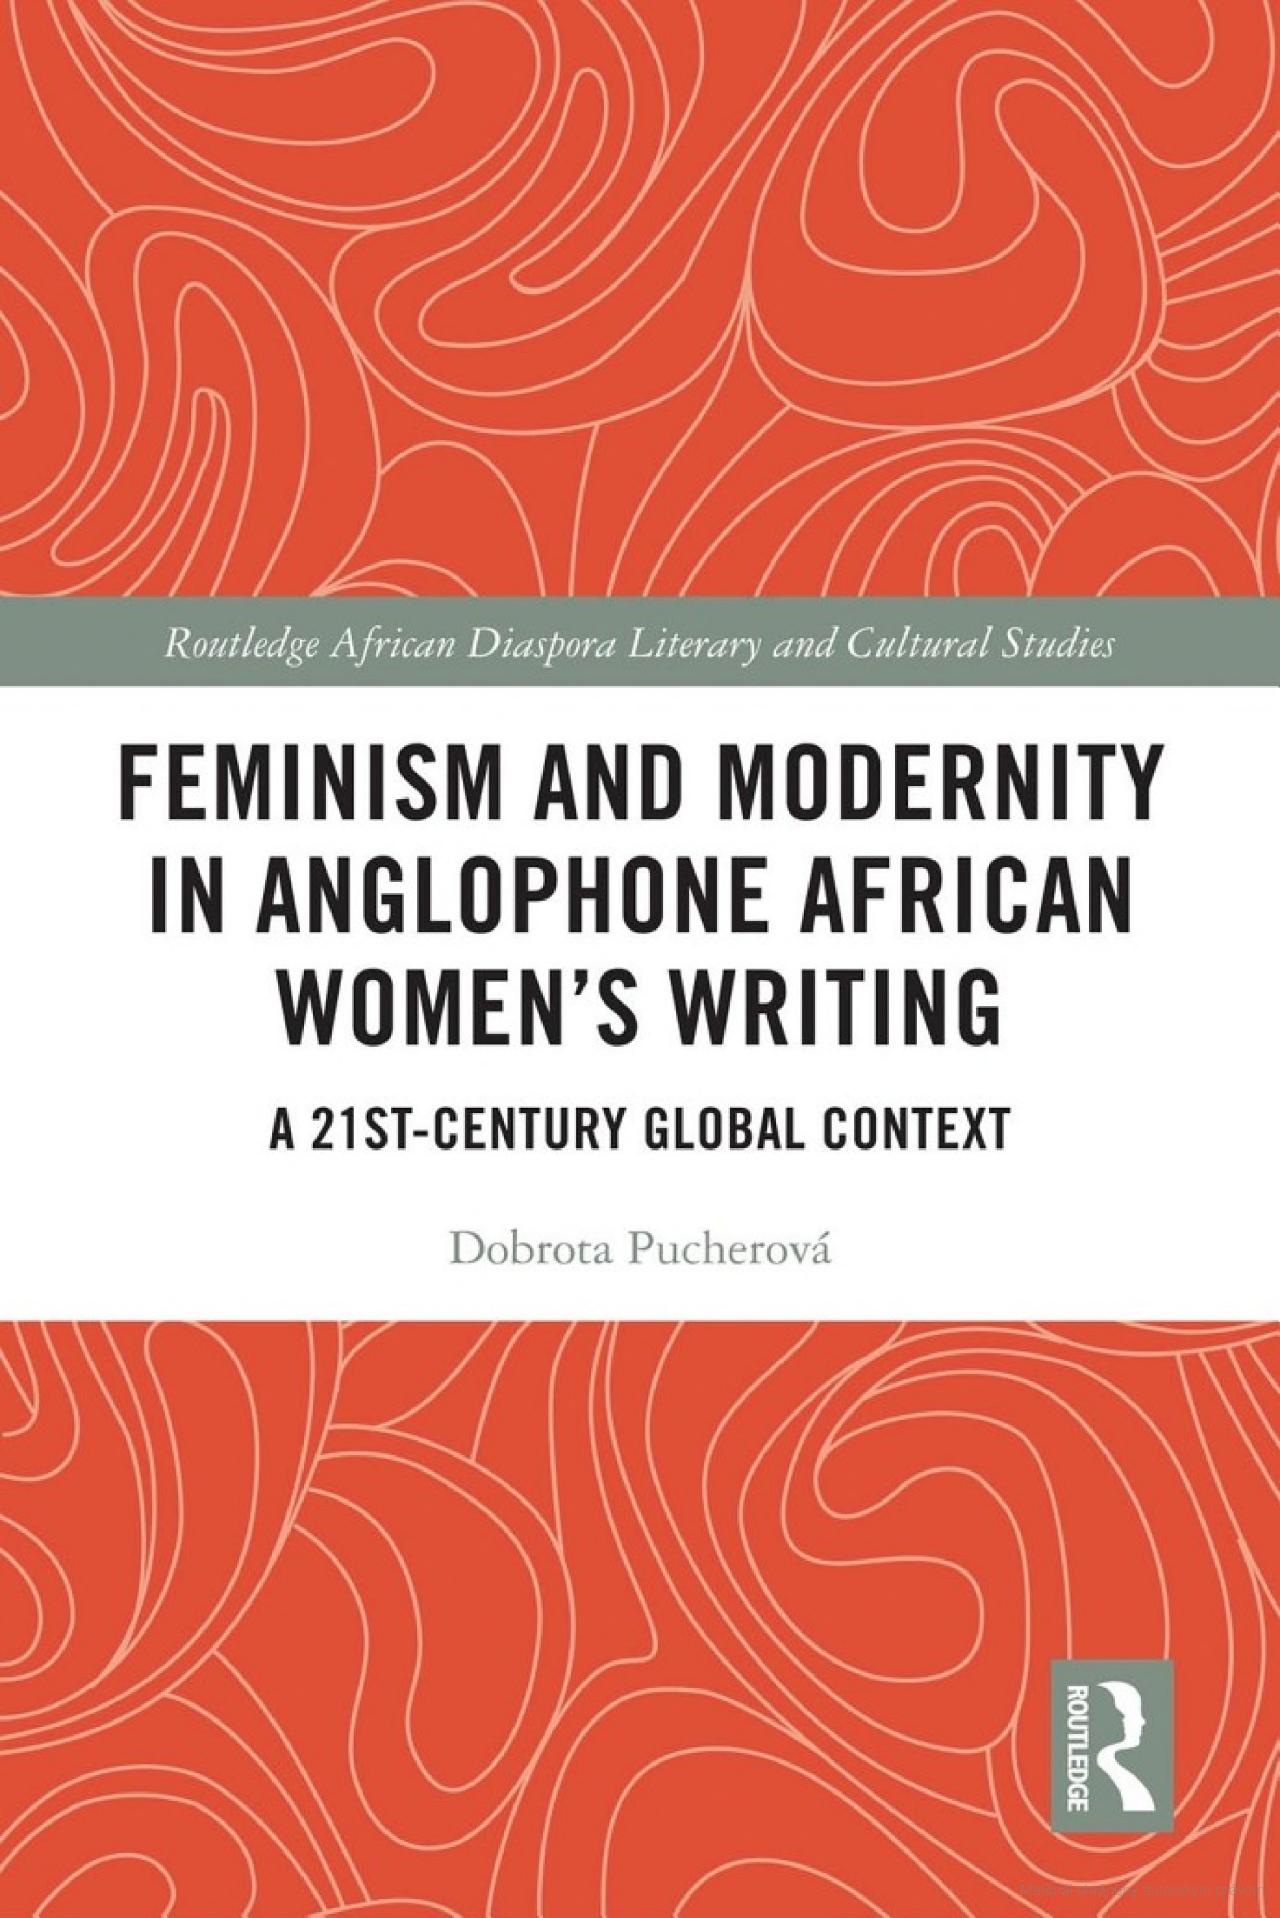 Feminism and Modernity in Anglophone African Women’s Writing:  A 21st-Century Global Context